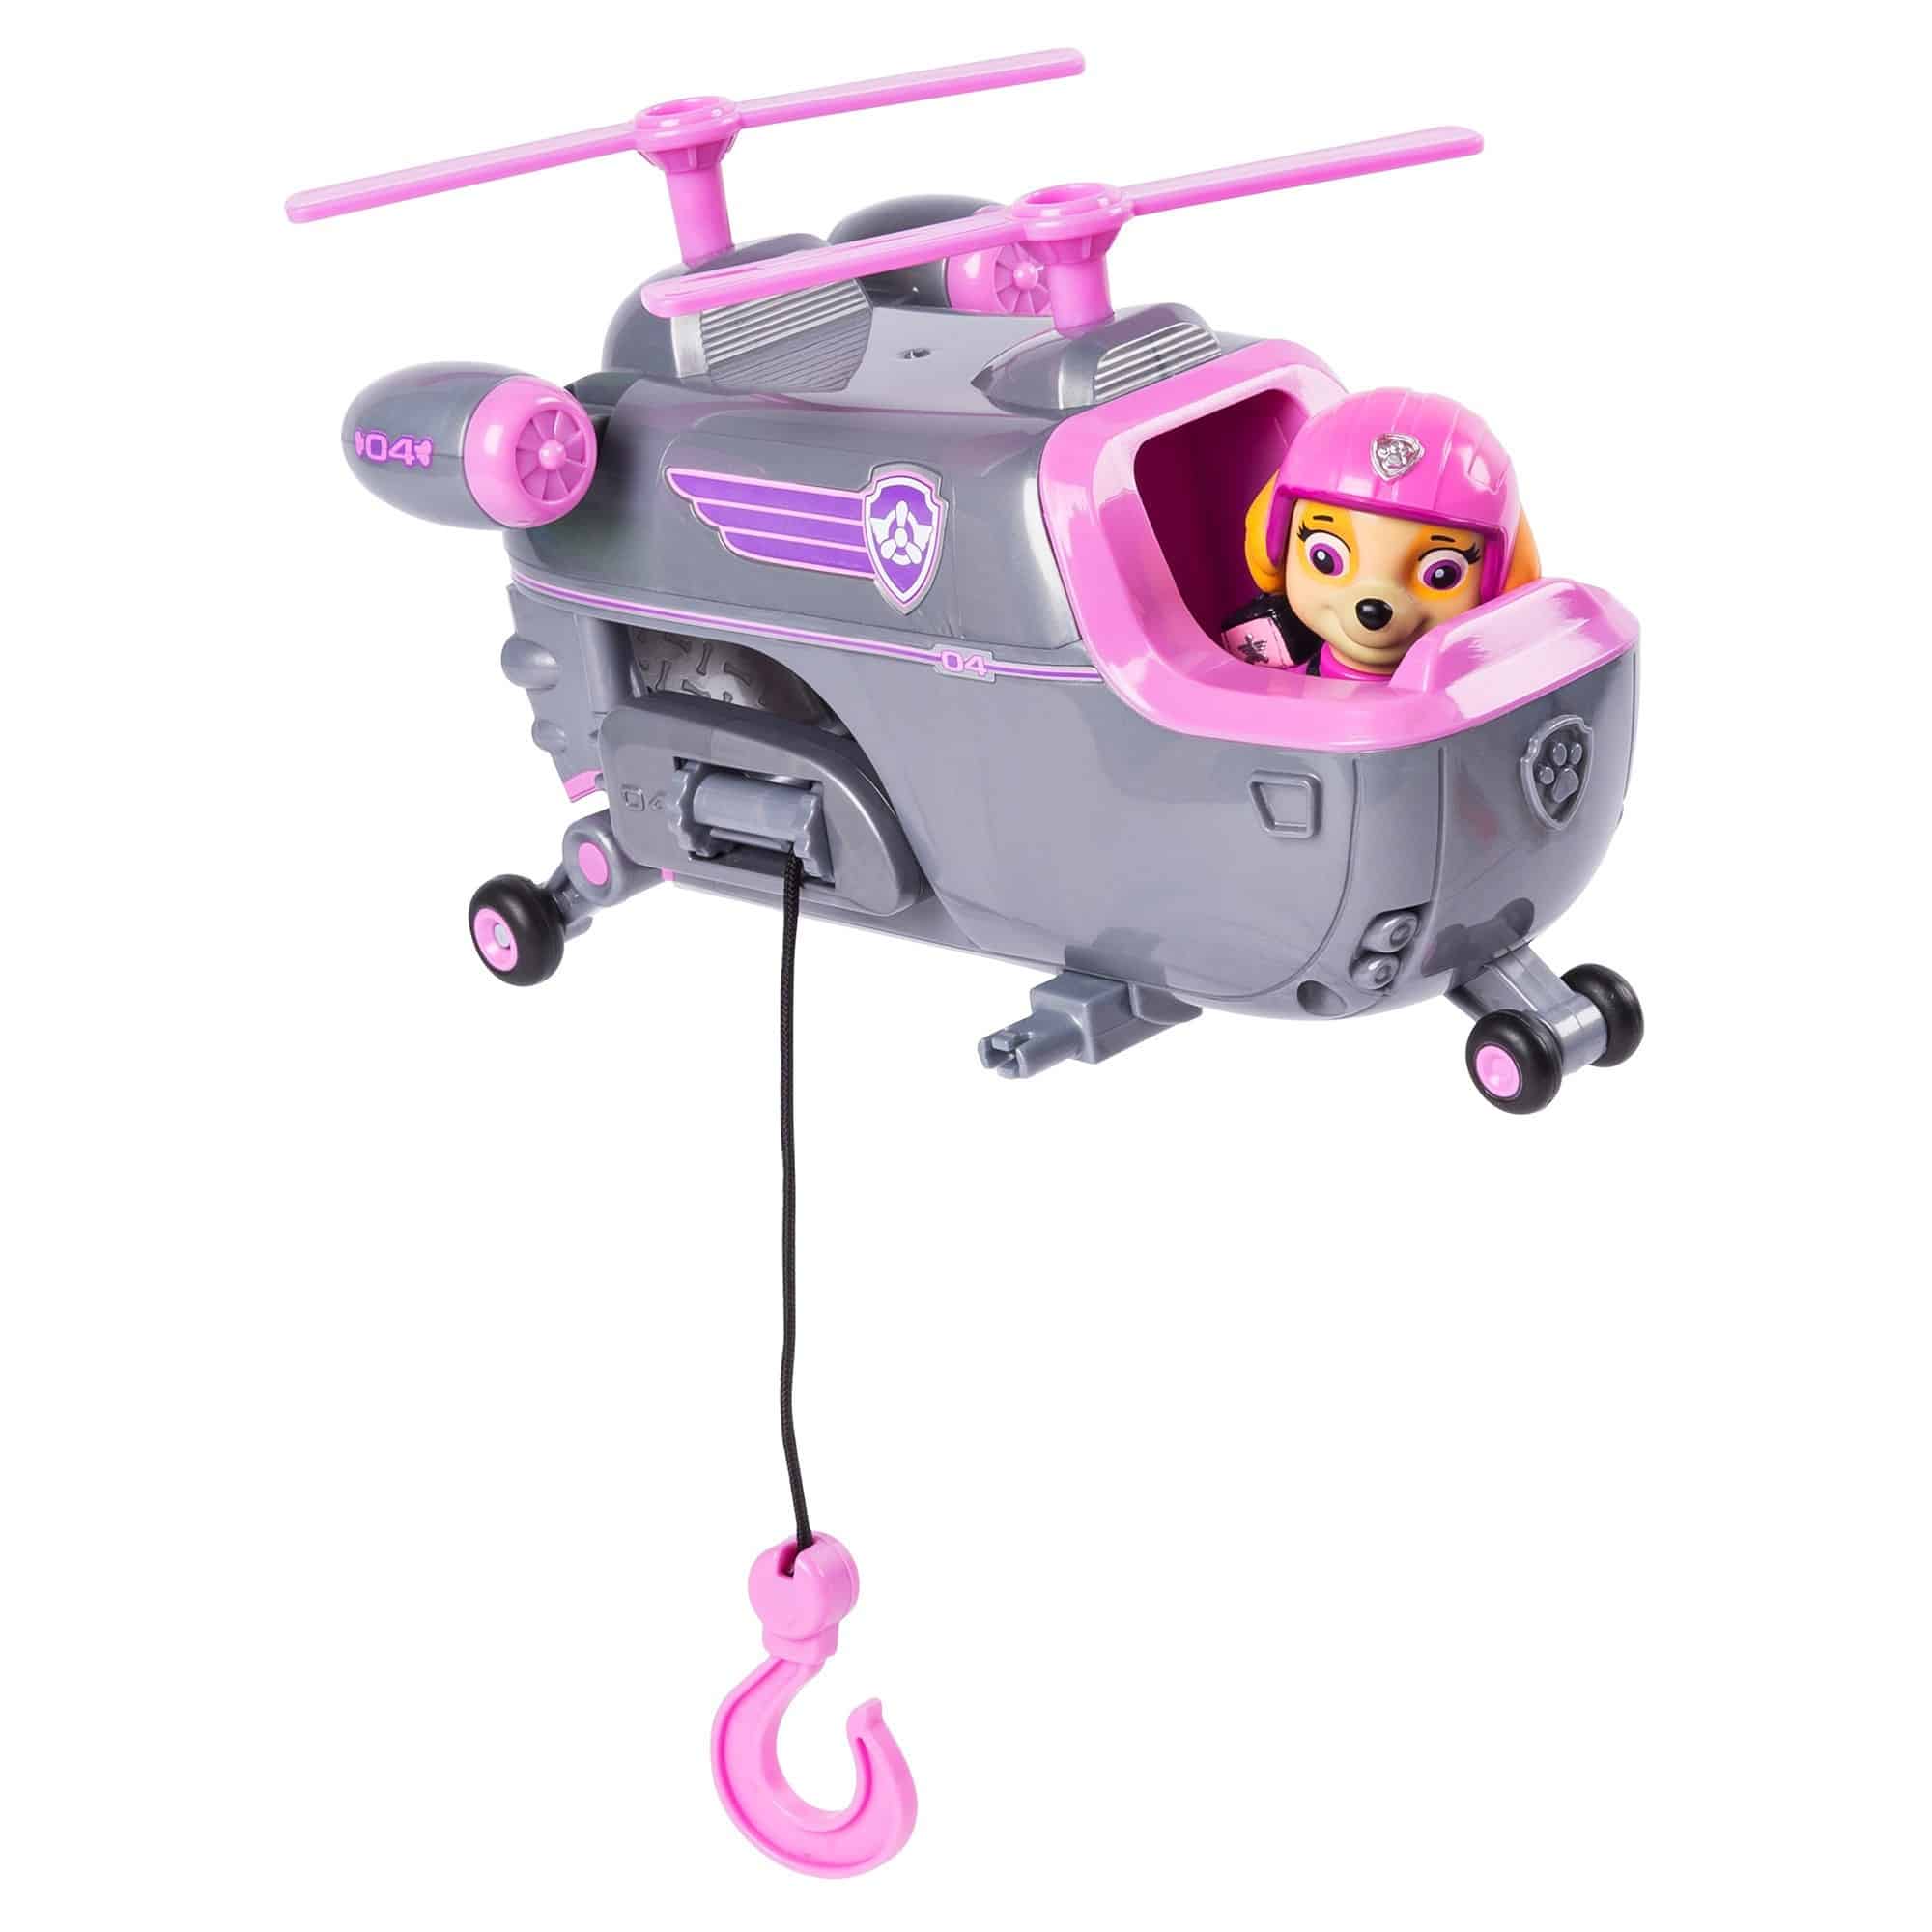 Nickelodeon - Paw Patrol Ultimate Rescue - Skye Helicopter